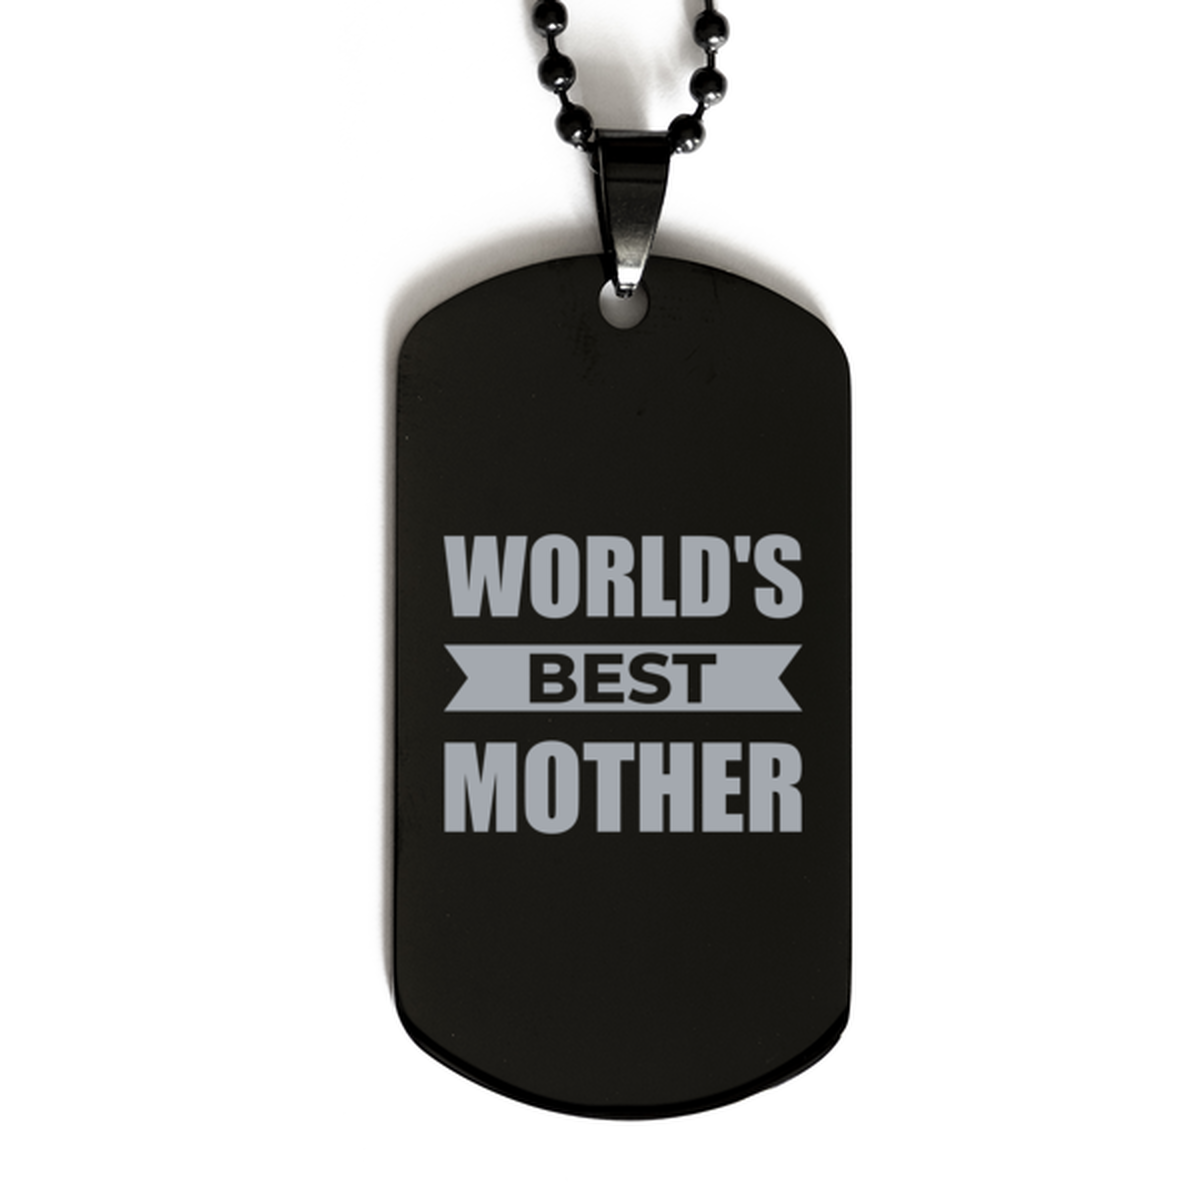 Worlds Best Mother Gifts, Funny Black Engraved Dog Tag For Mother, Birthday Presents For Women